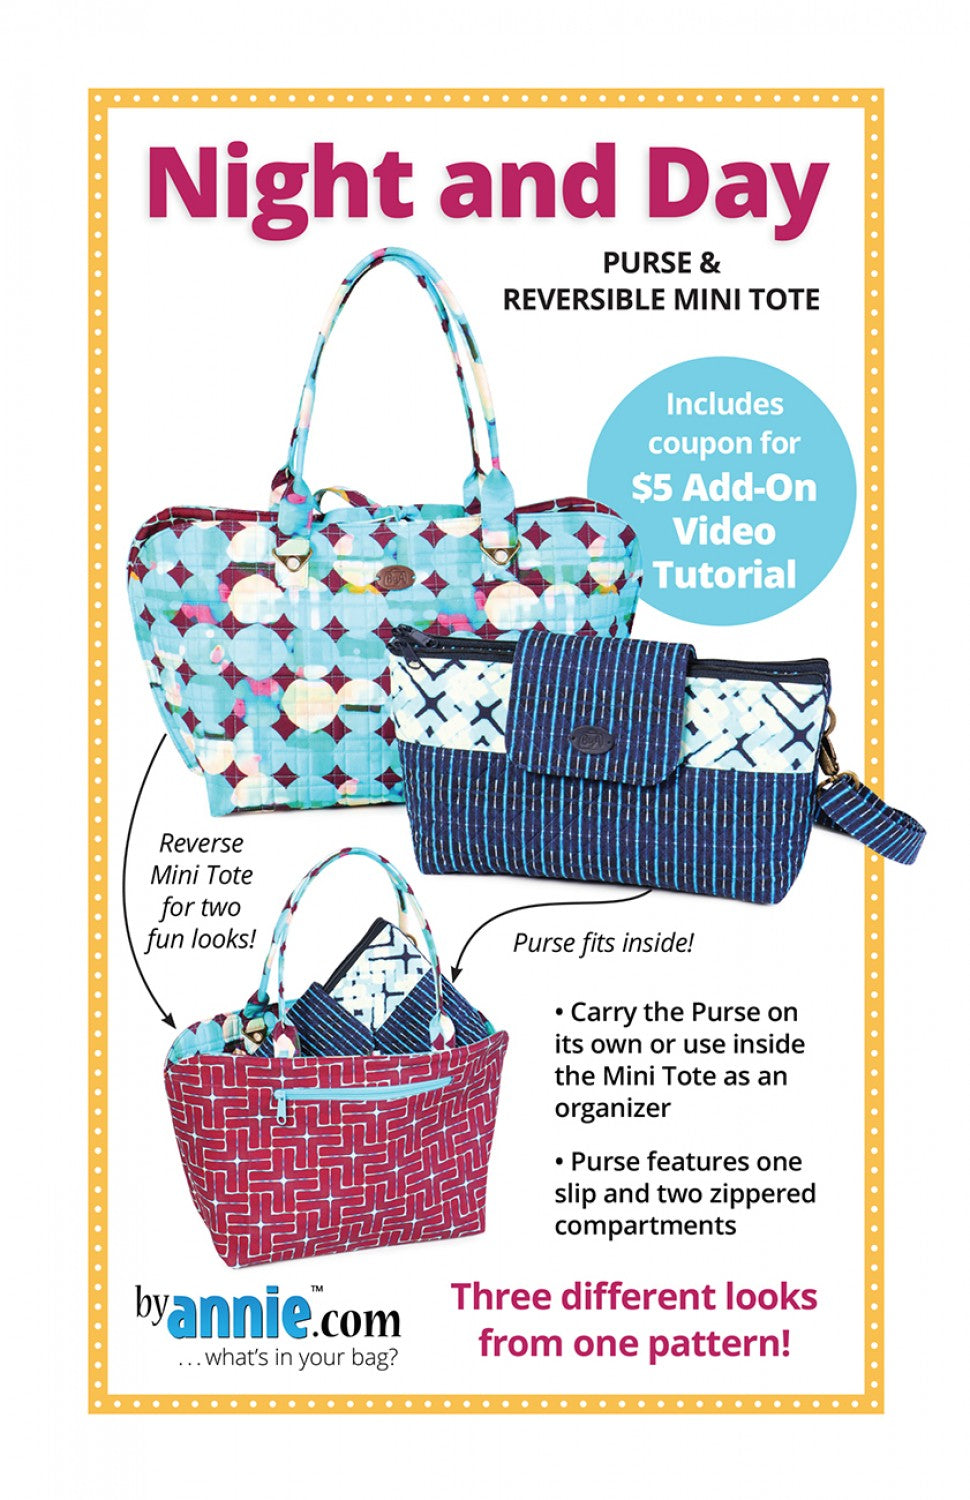 Night and Day - Purse and Reversible Mini Tote